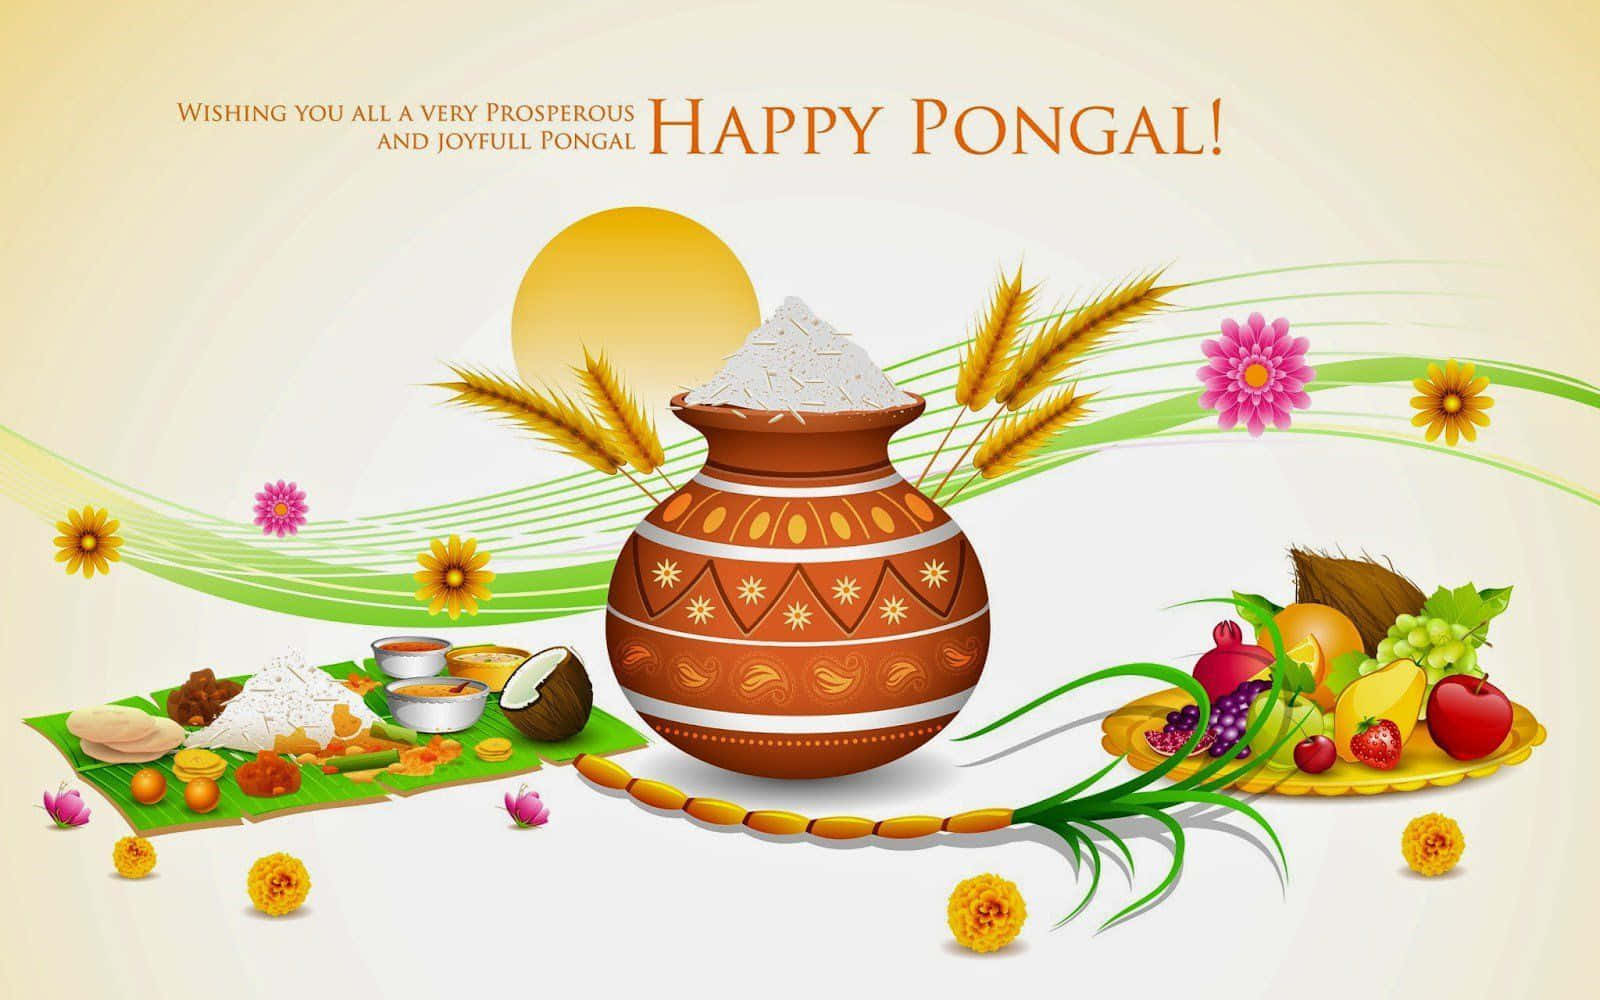 Celebrate Pongal with friends and family